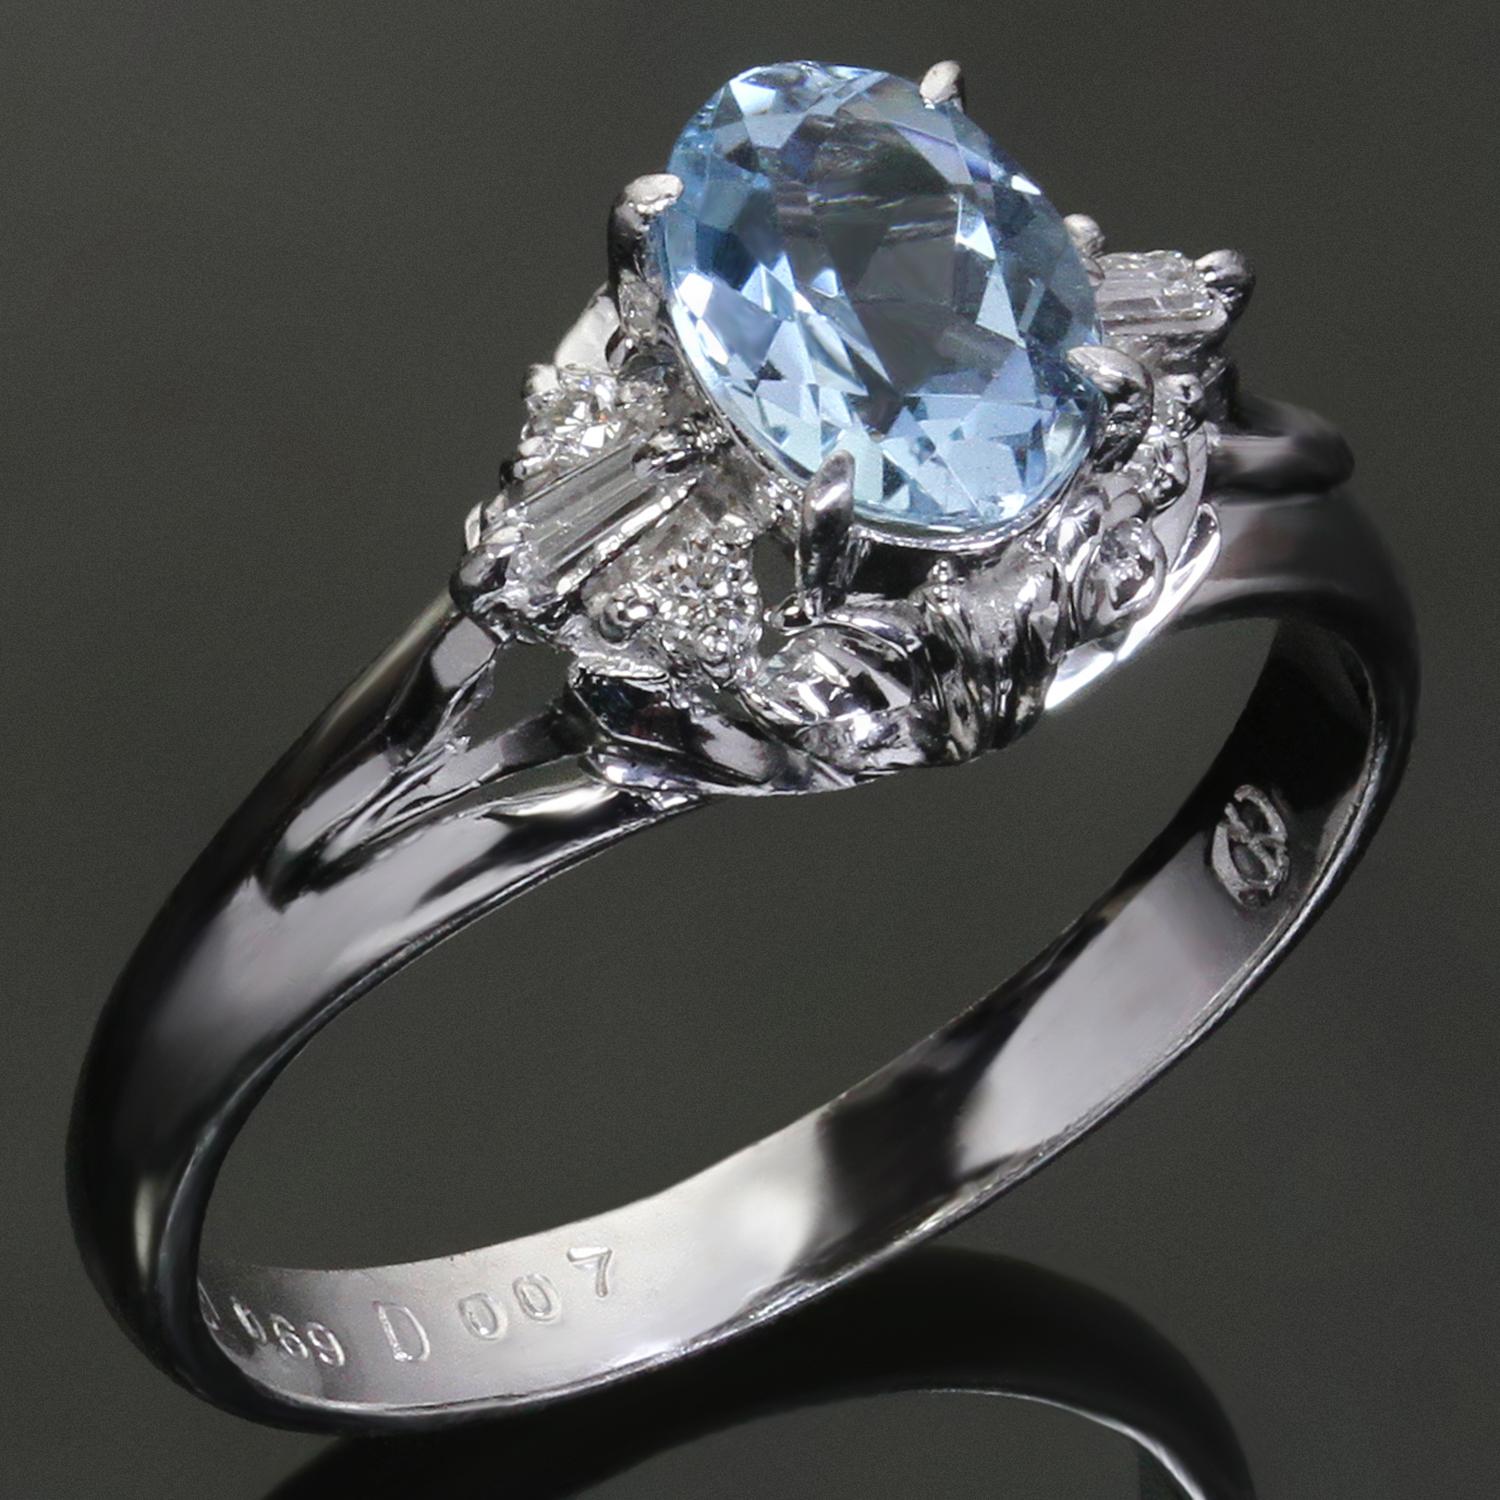 This stunning estate cocktail ring is crafted in platinum and features a sparkling bright blue oval aquamarine gemstone weighing an estimated 0.69 carats, surrounded by round diamonds weighing an estimated 0.07 carats. Made in United States circa